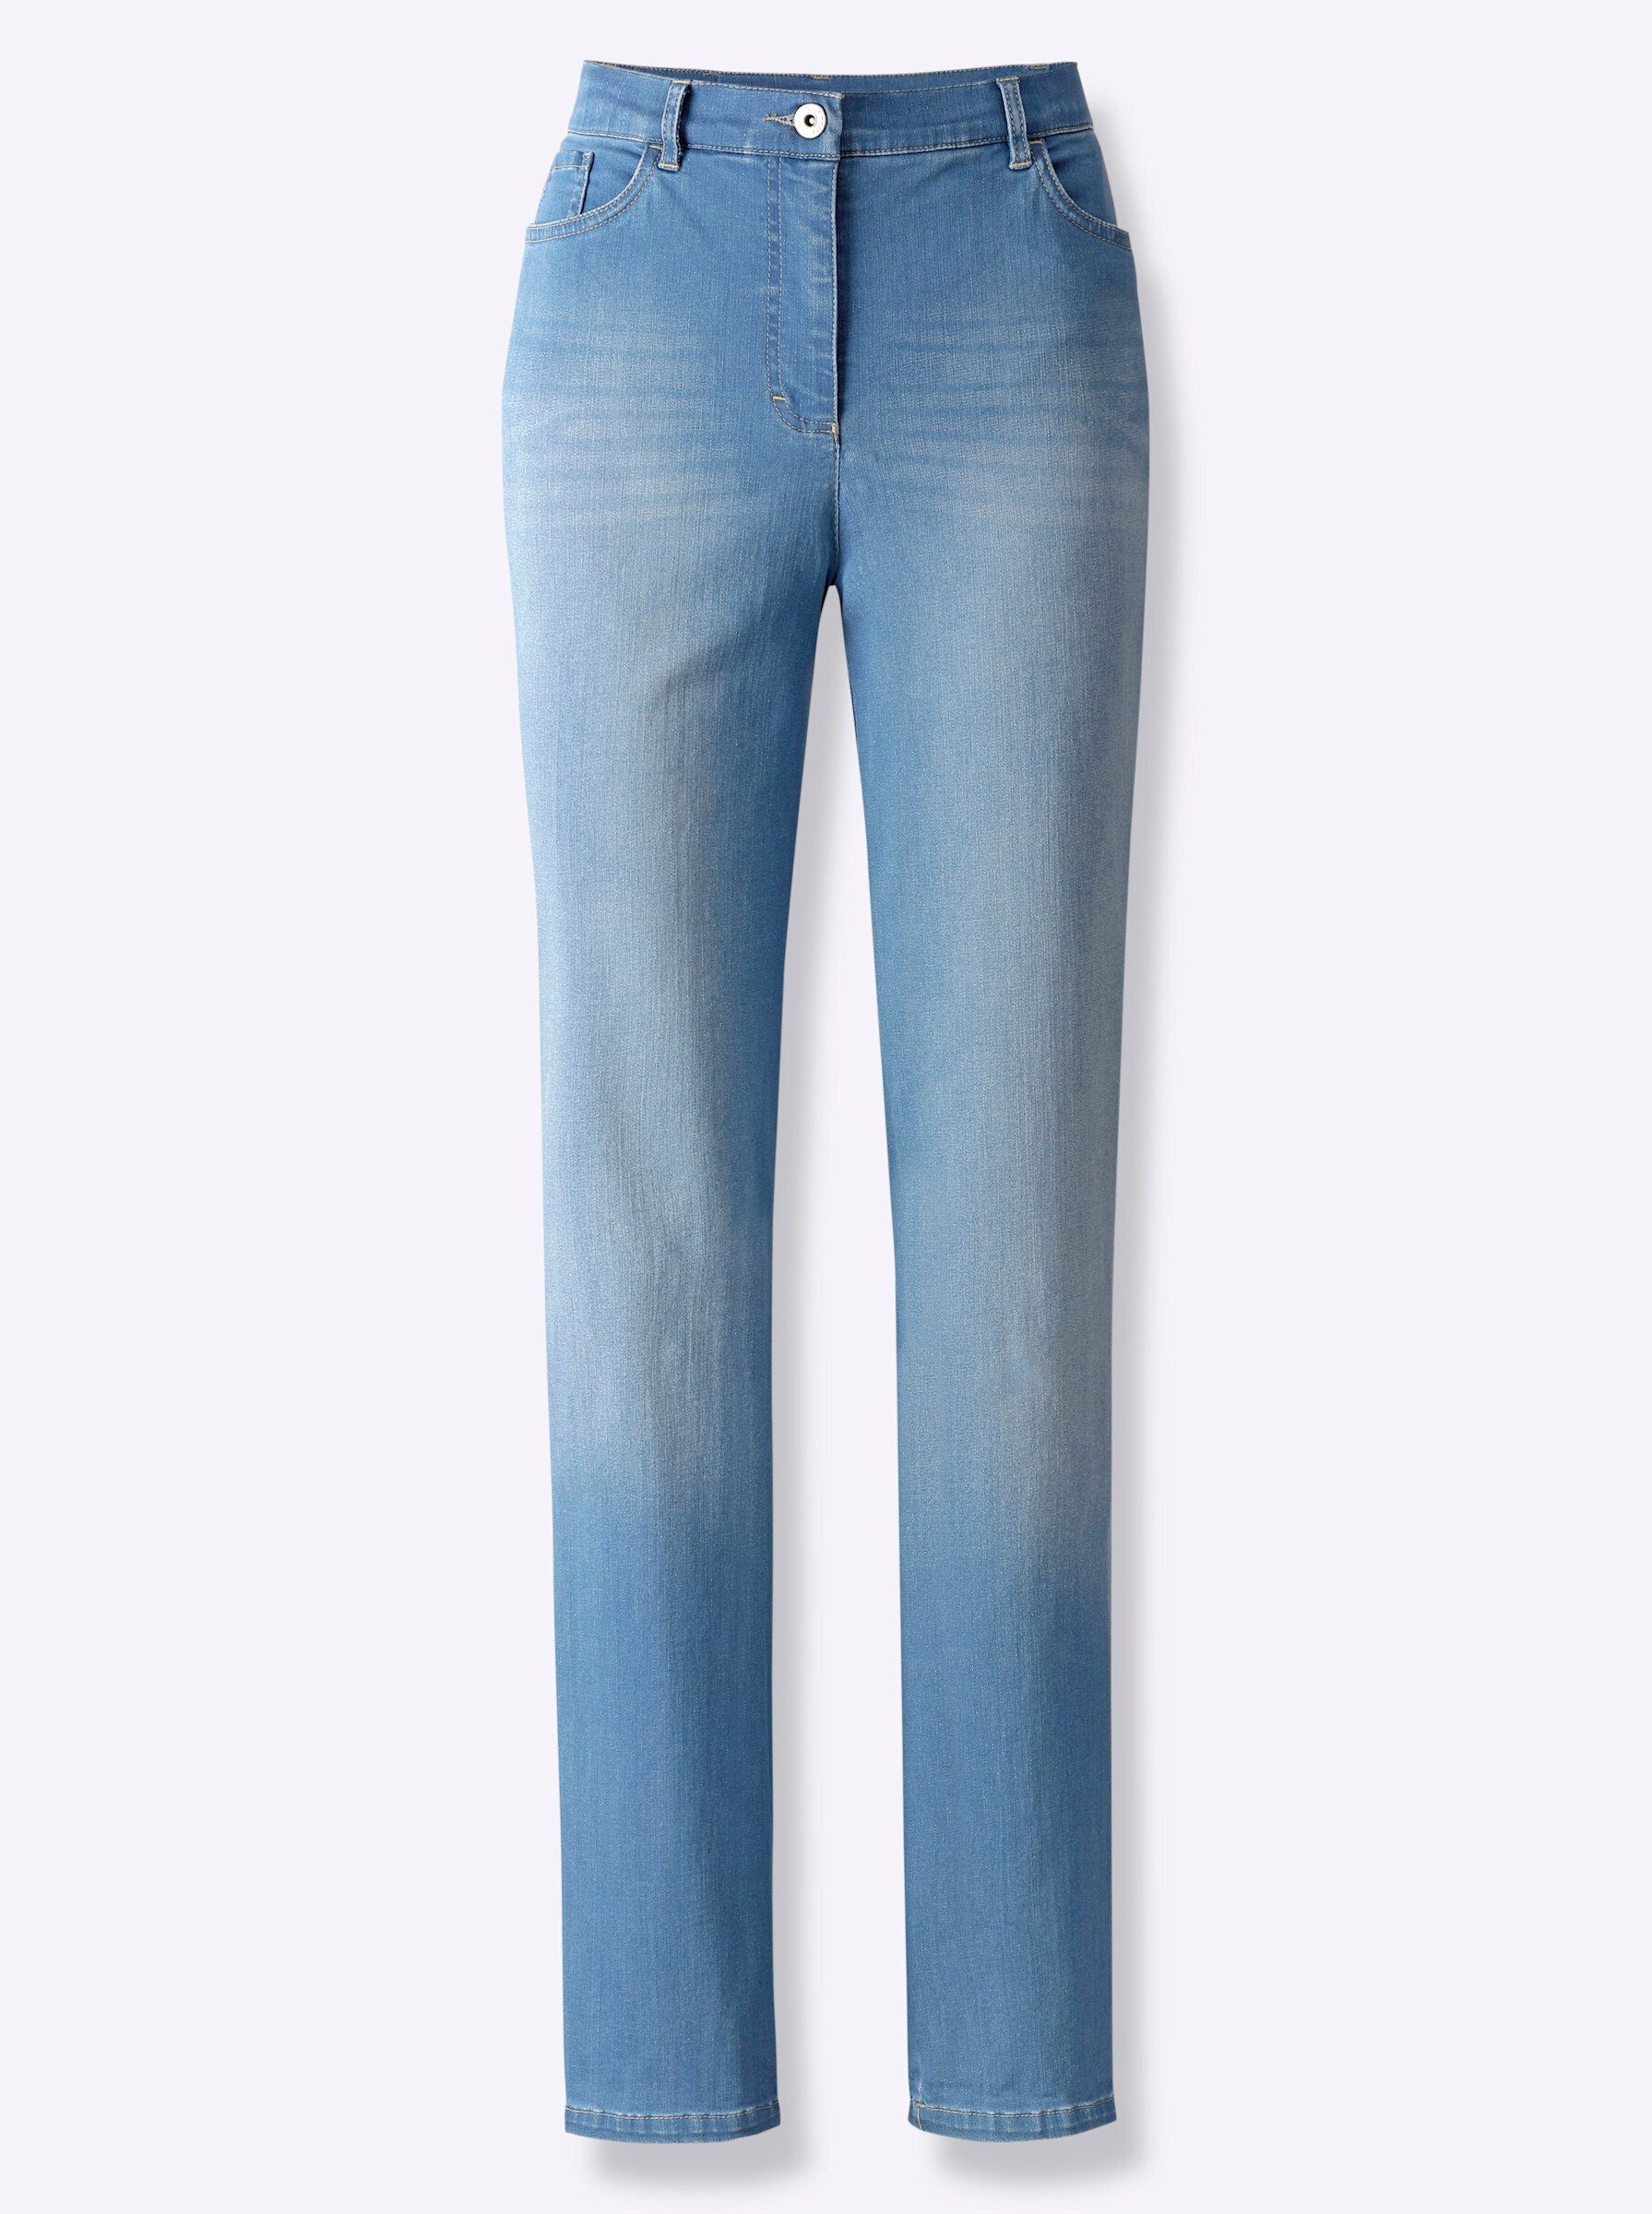 Cosma Bequeme Jeans blue-bleached